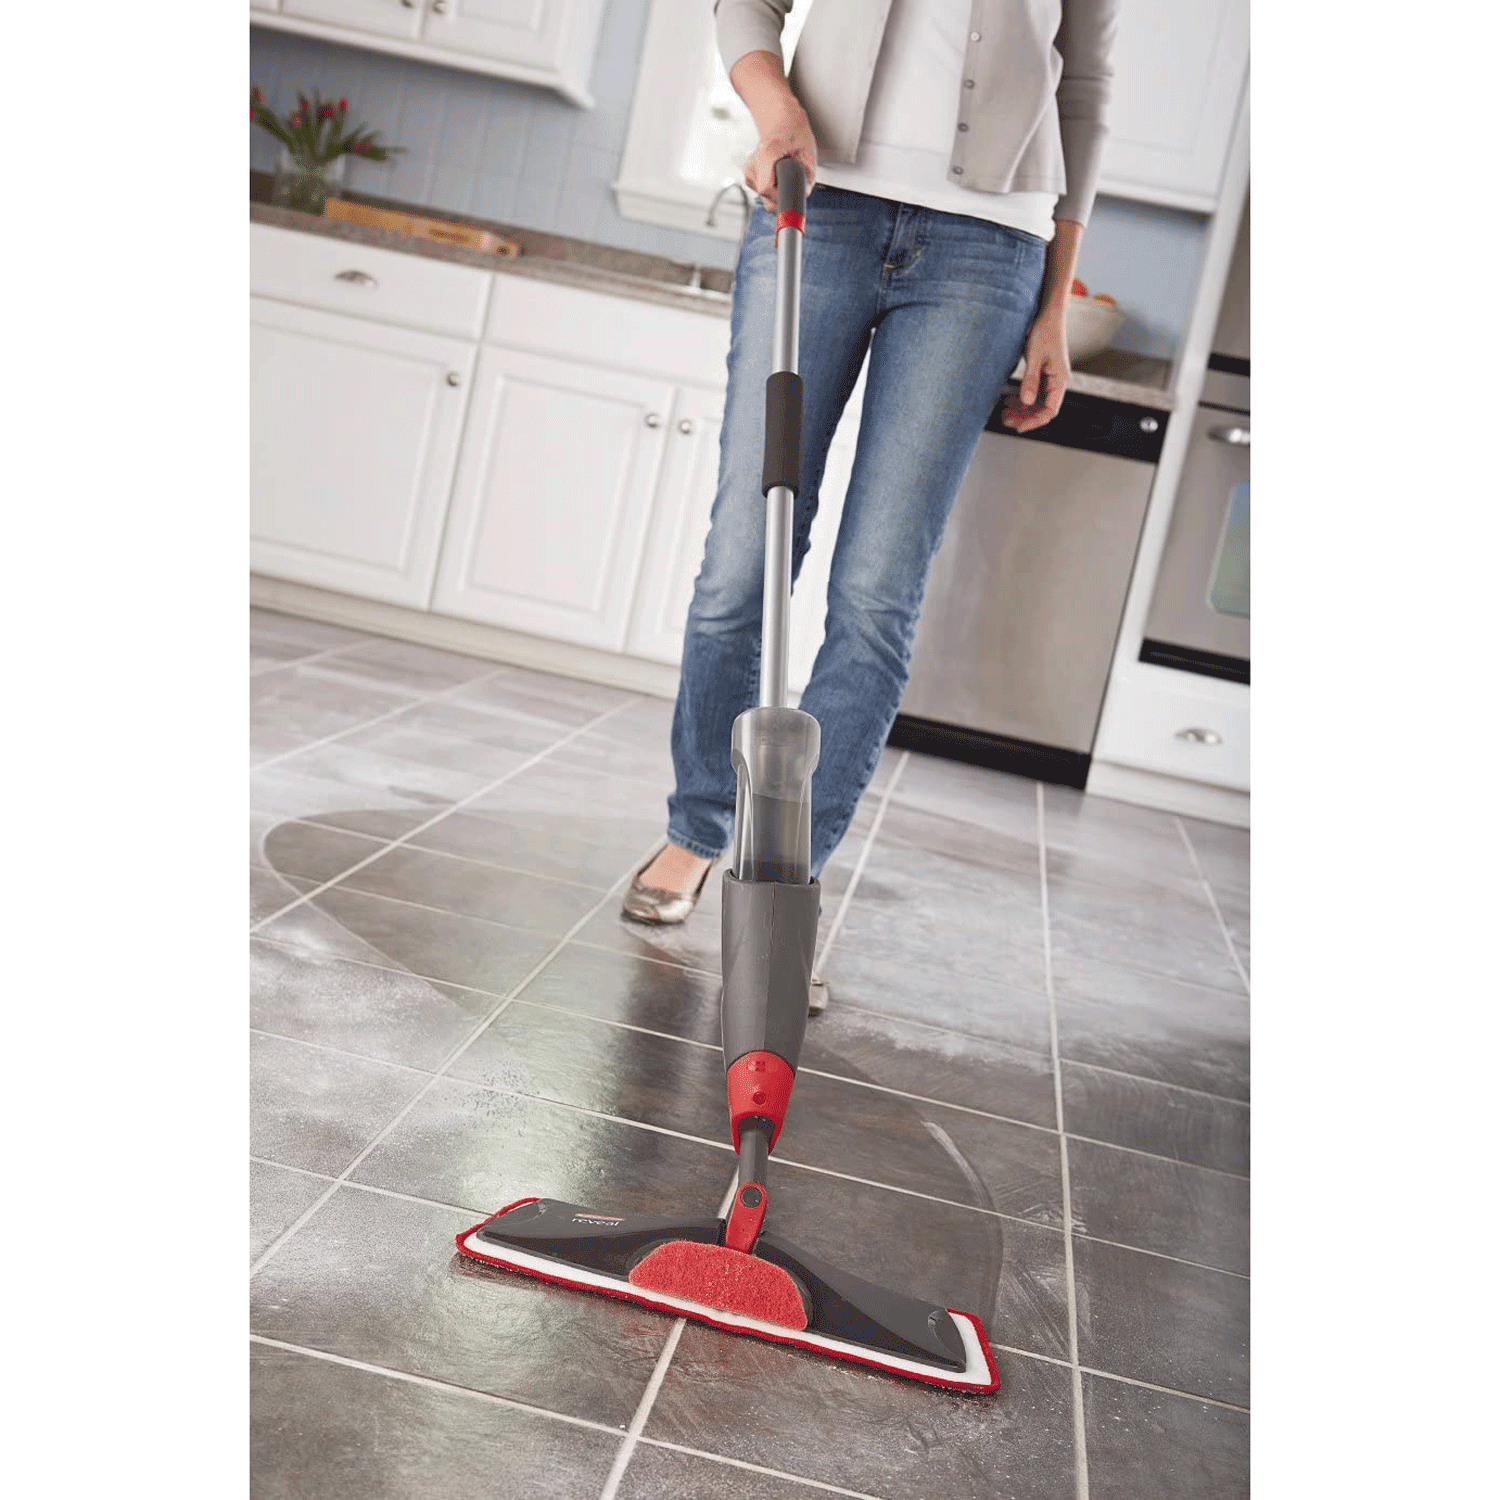 Rubbermaid Reveal Spray Mop Kit (2856049) – your best buys at